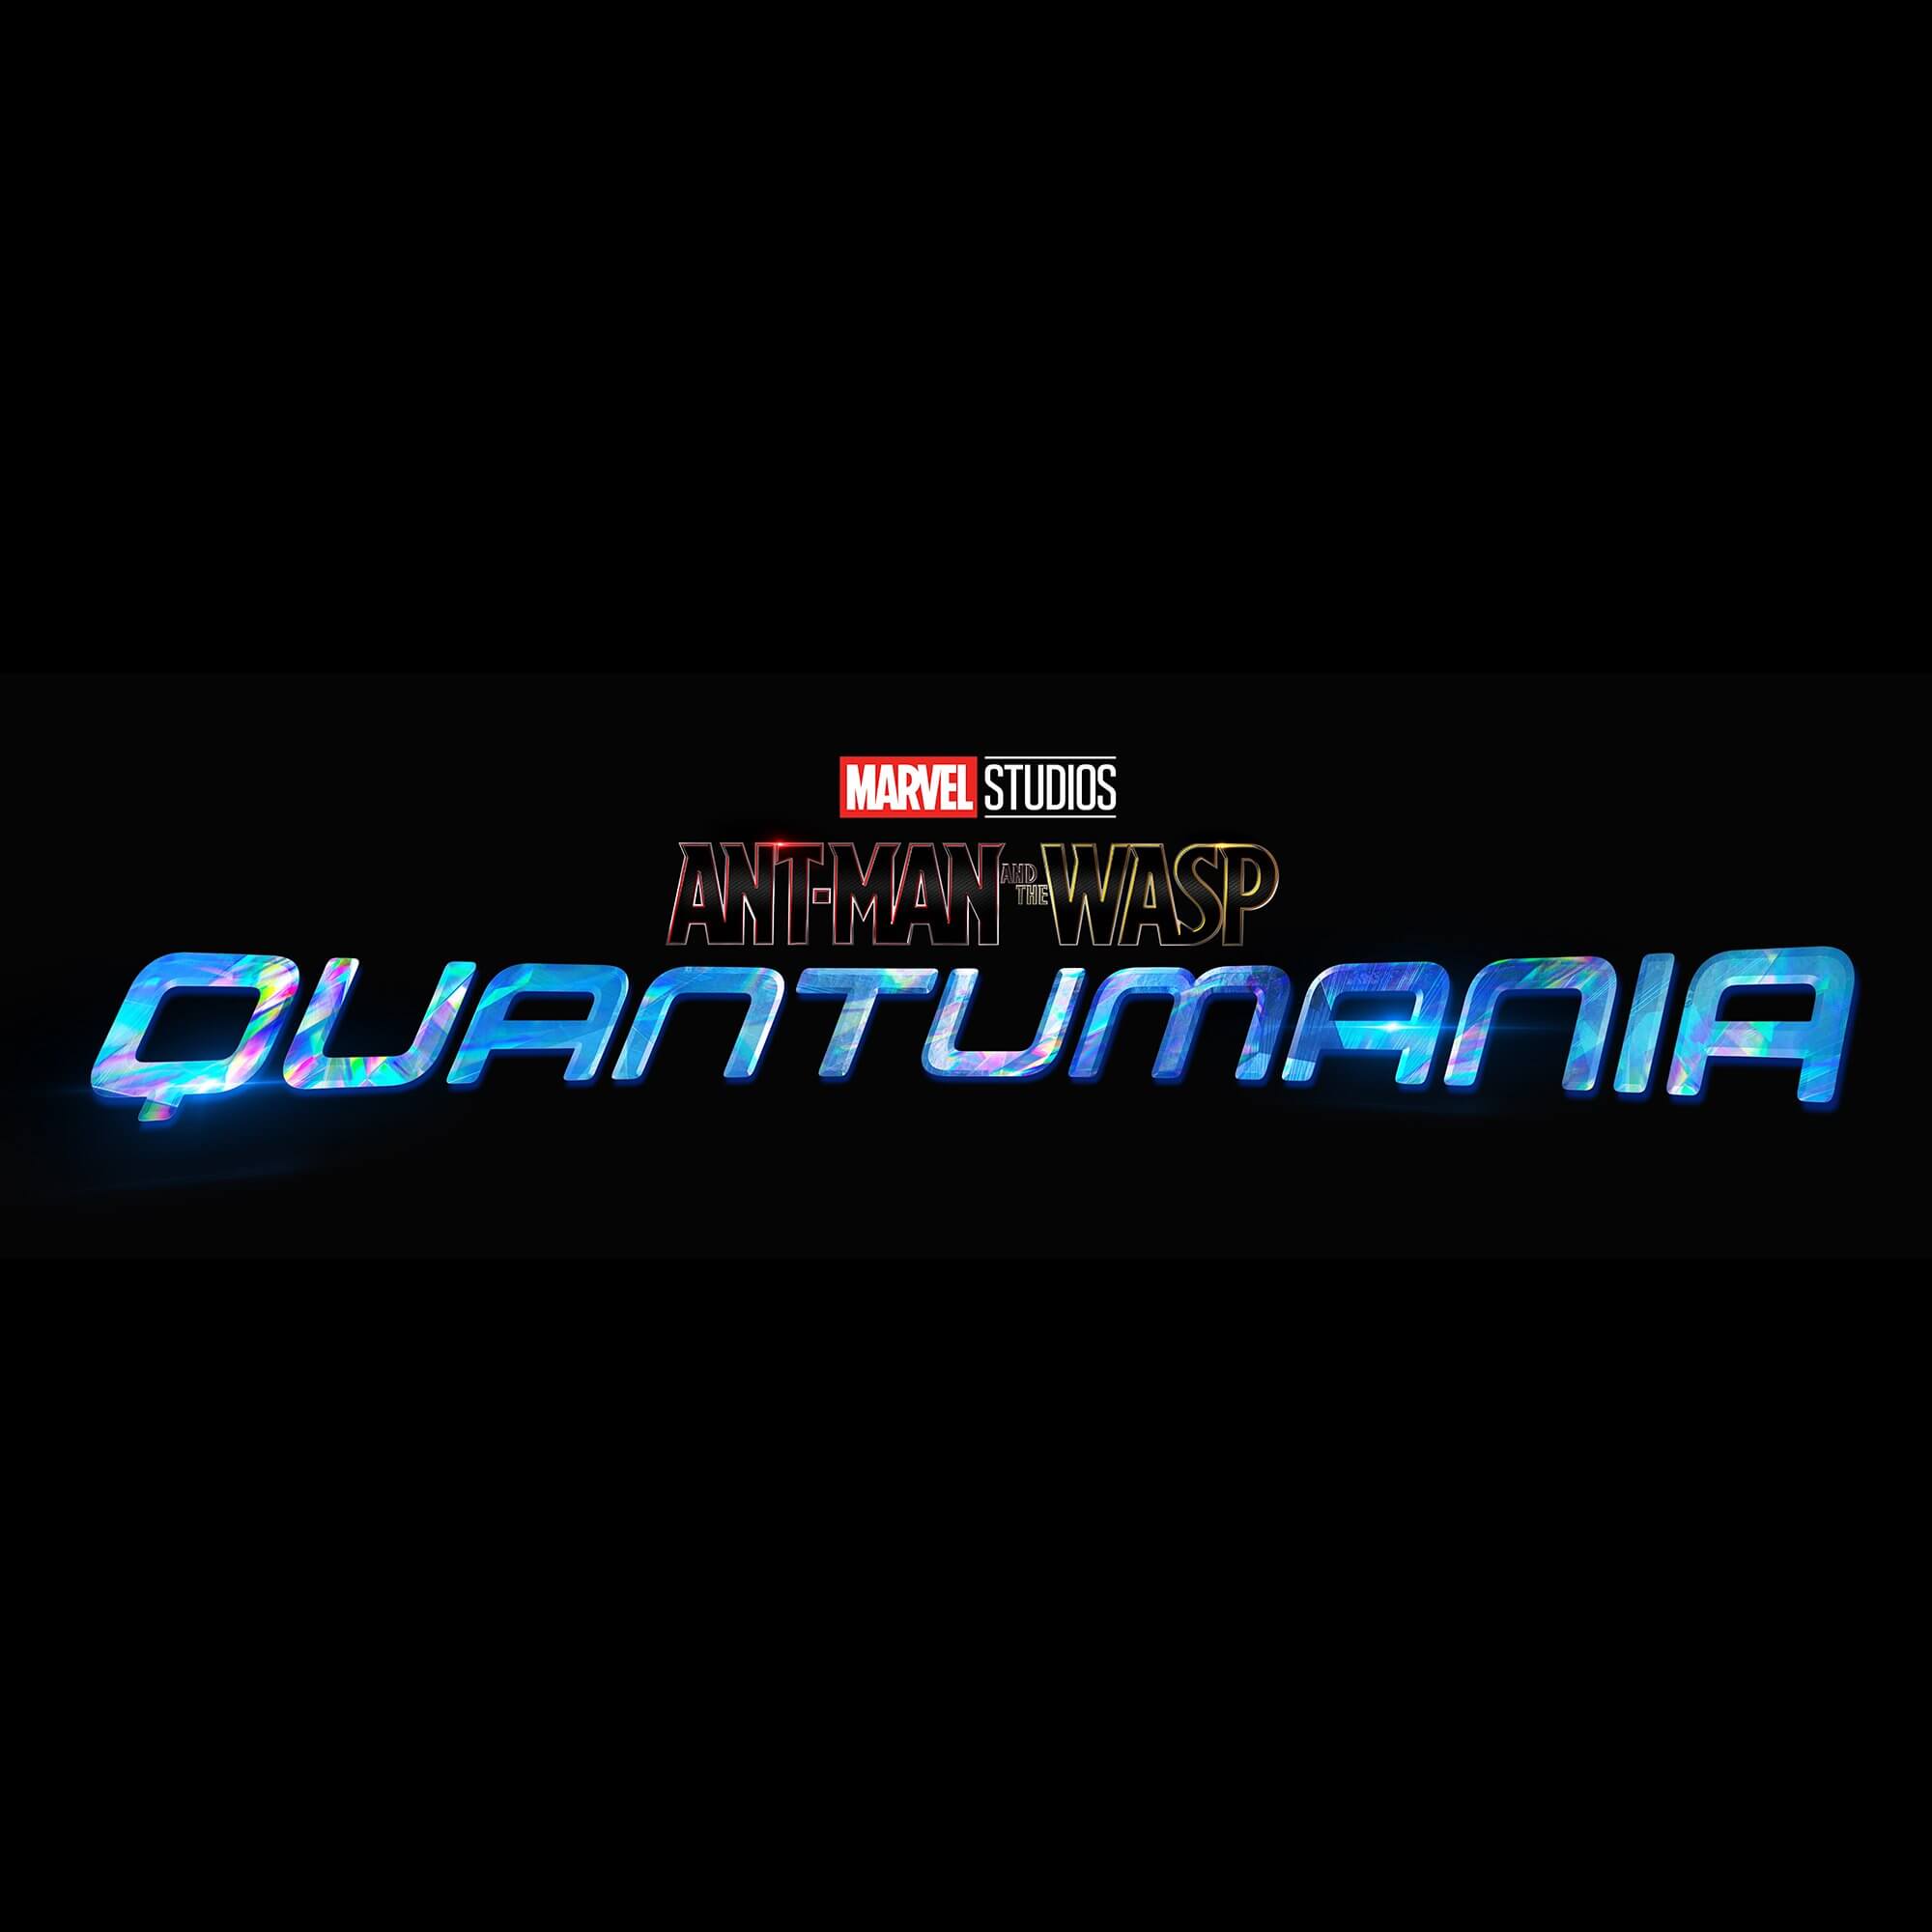 UPDATE on ‘Ant-Man and The Wasp: Quantumania’ UK Casting Call